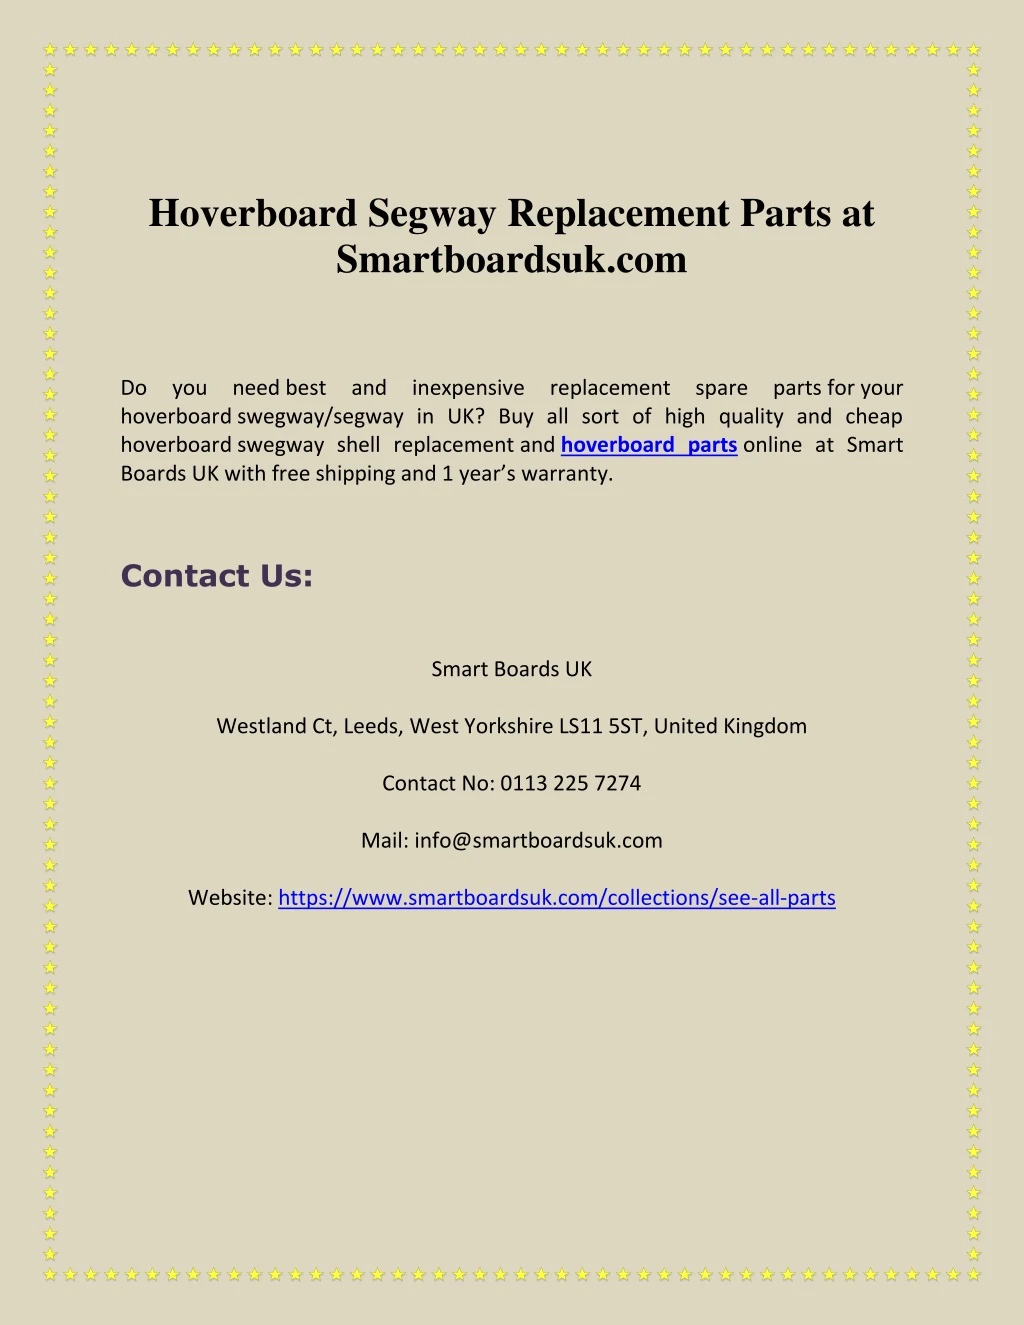 hoverboard segway replacement parts